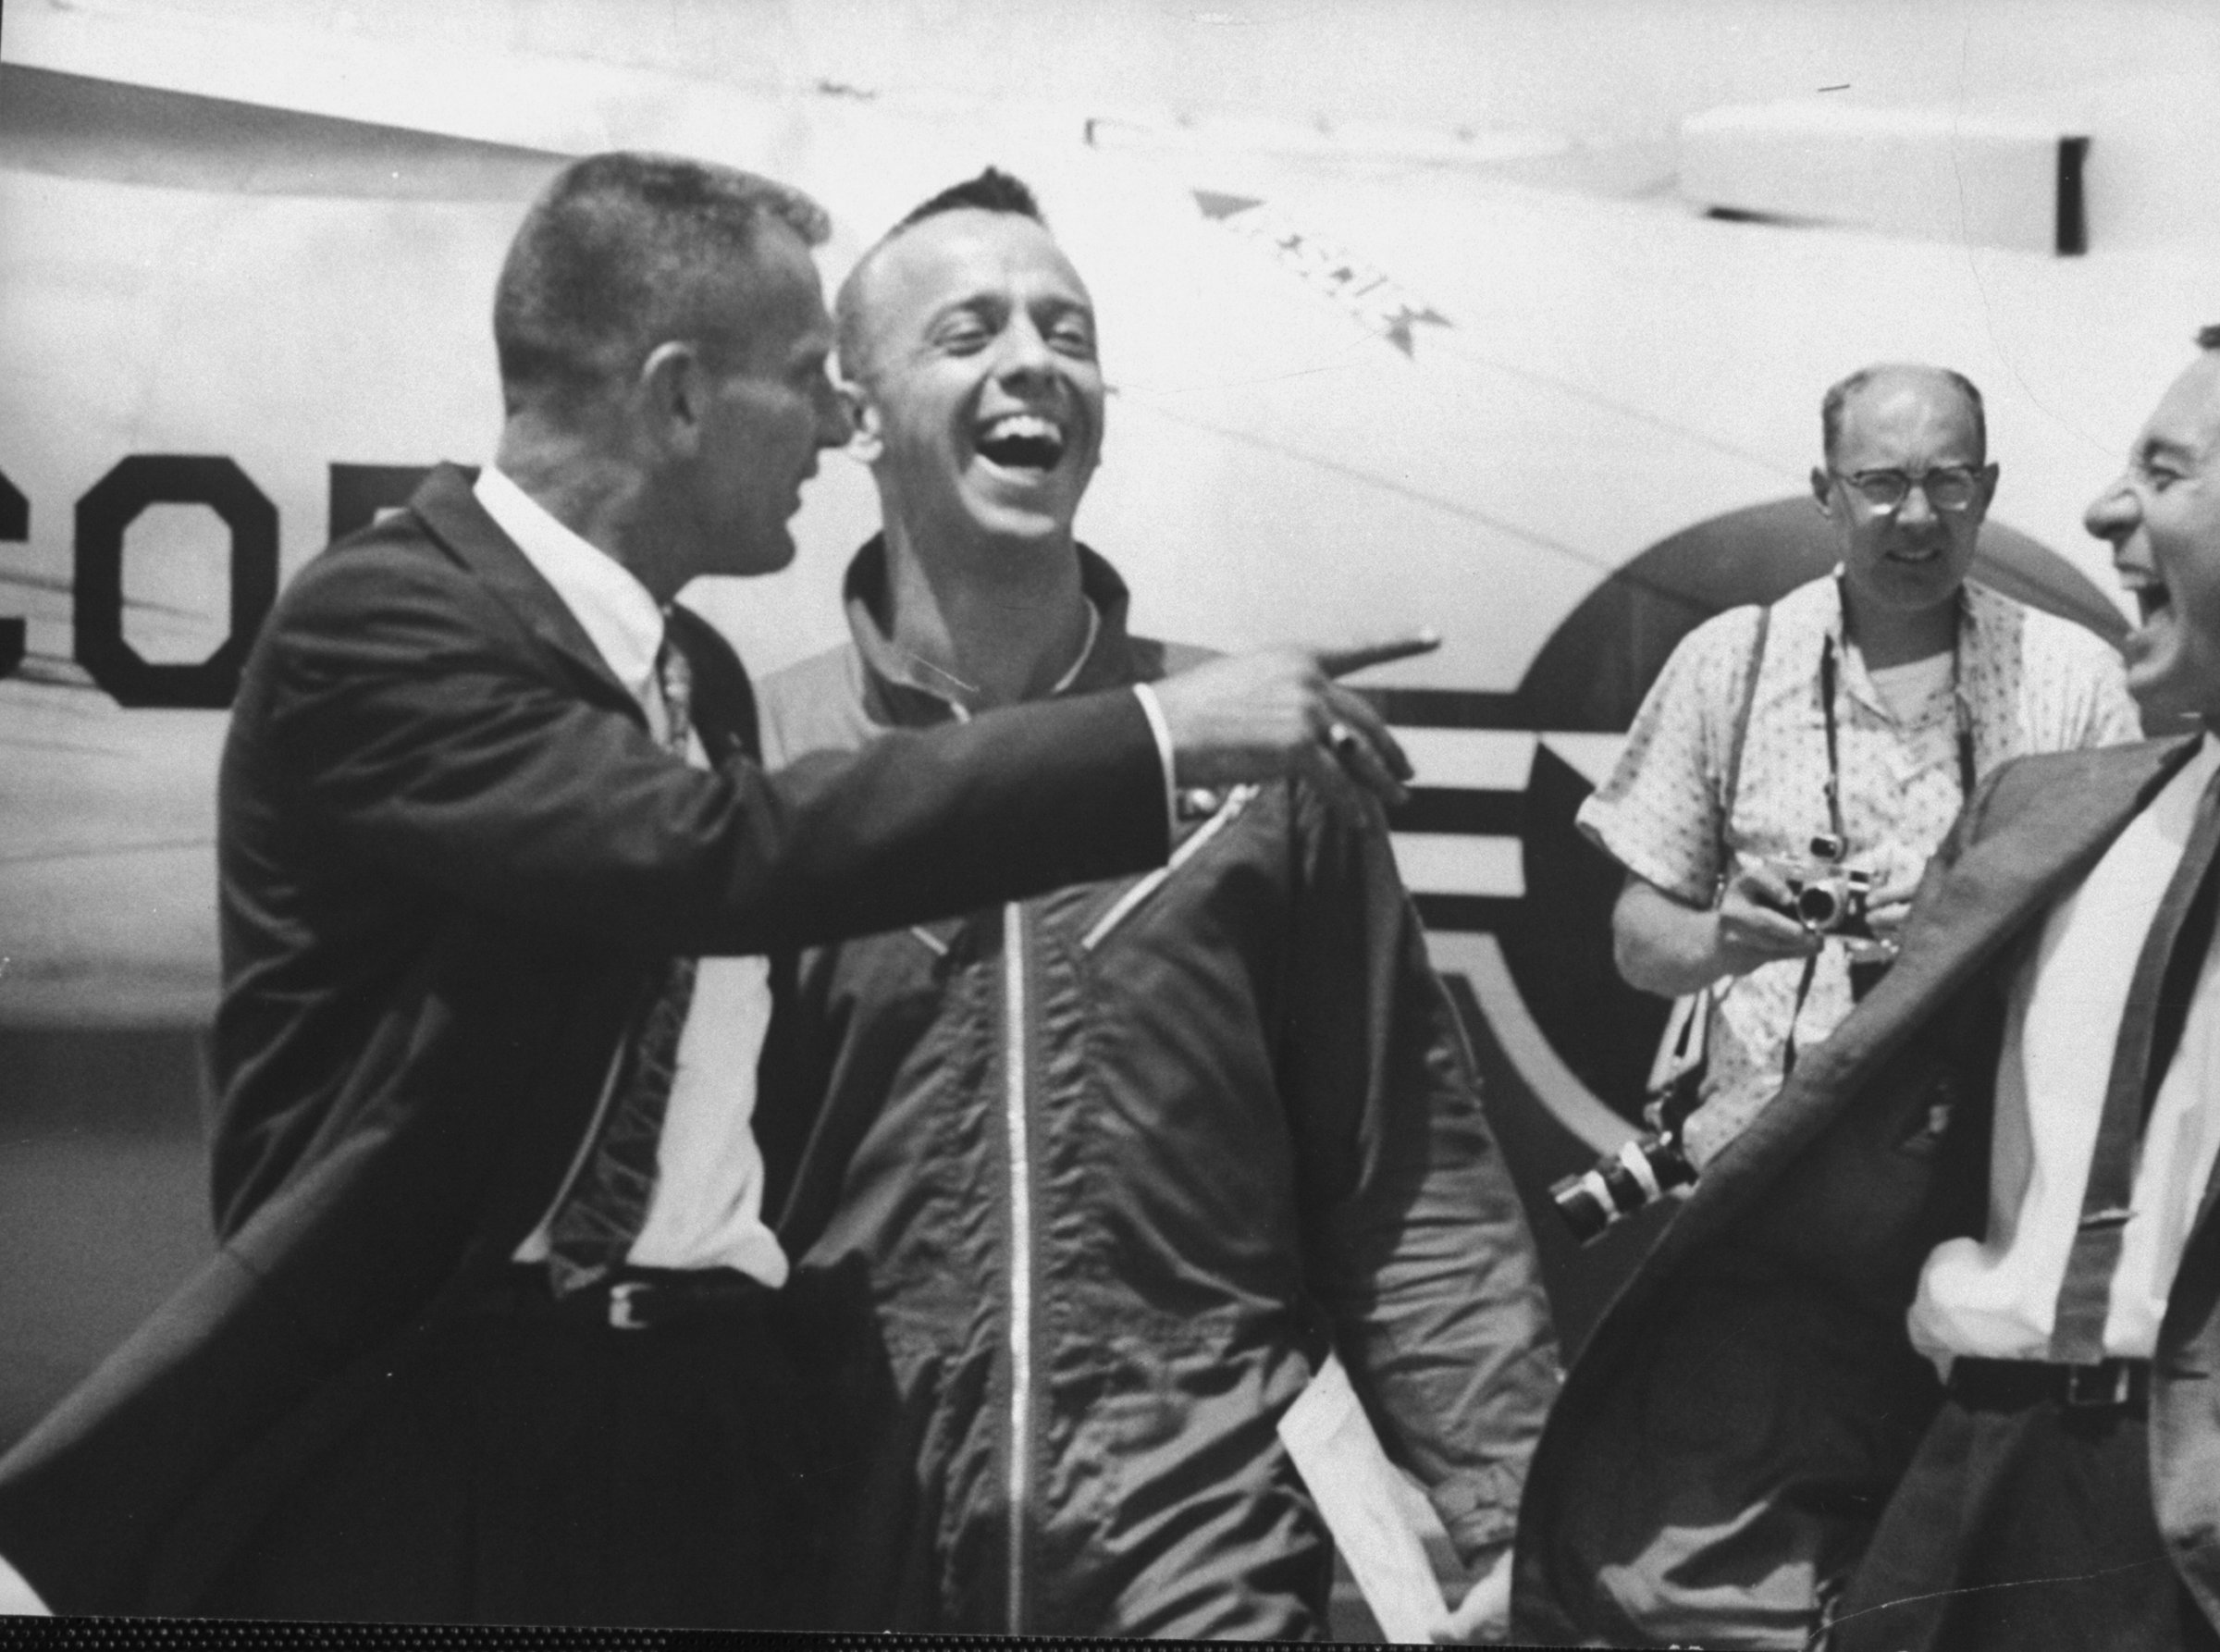 In an image that captures the at-once easy and intense bond among the Mercury 7, Shepard laughs with fellow astronauts Gus Grissom (right) and Deke Slayton upon his arrival at Grand Bahama Island, shortly after his successful flight and splashdown, May 1961.